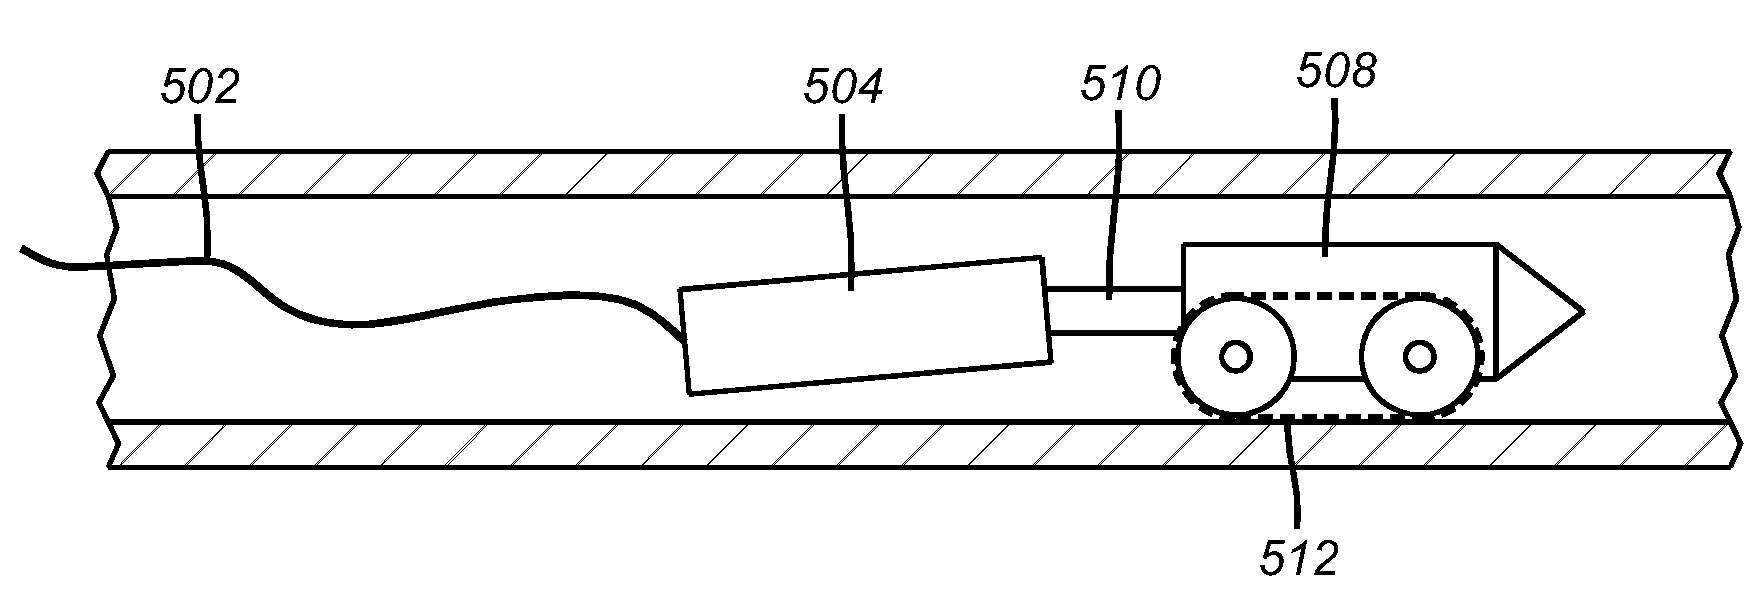 Slickline conveyed bottom hole assembly with tractor